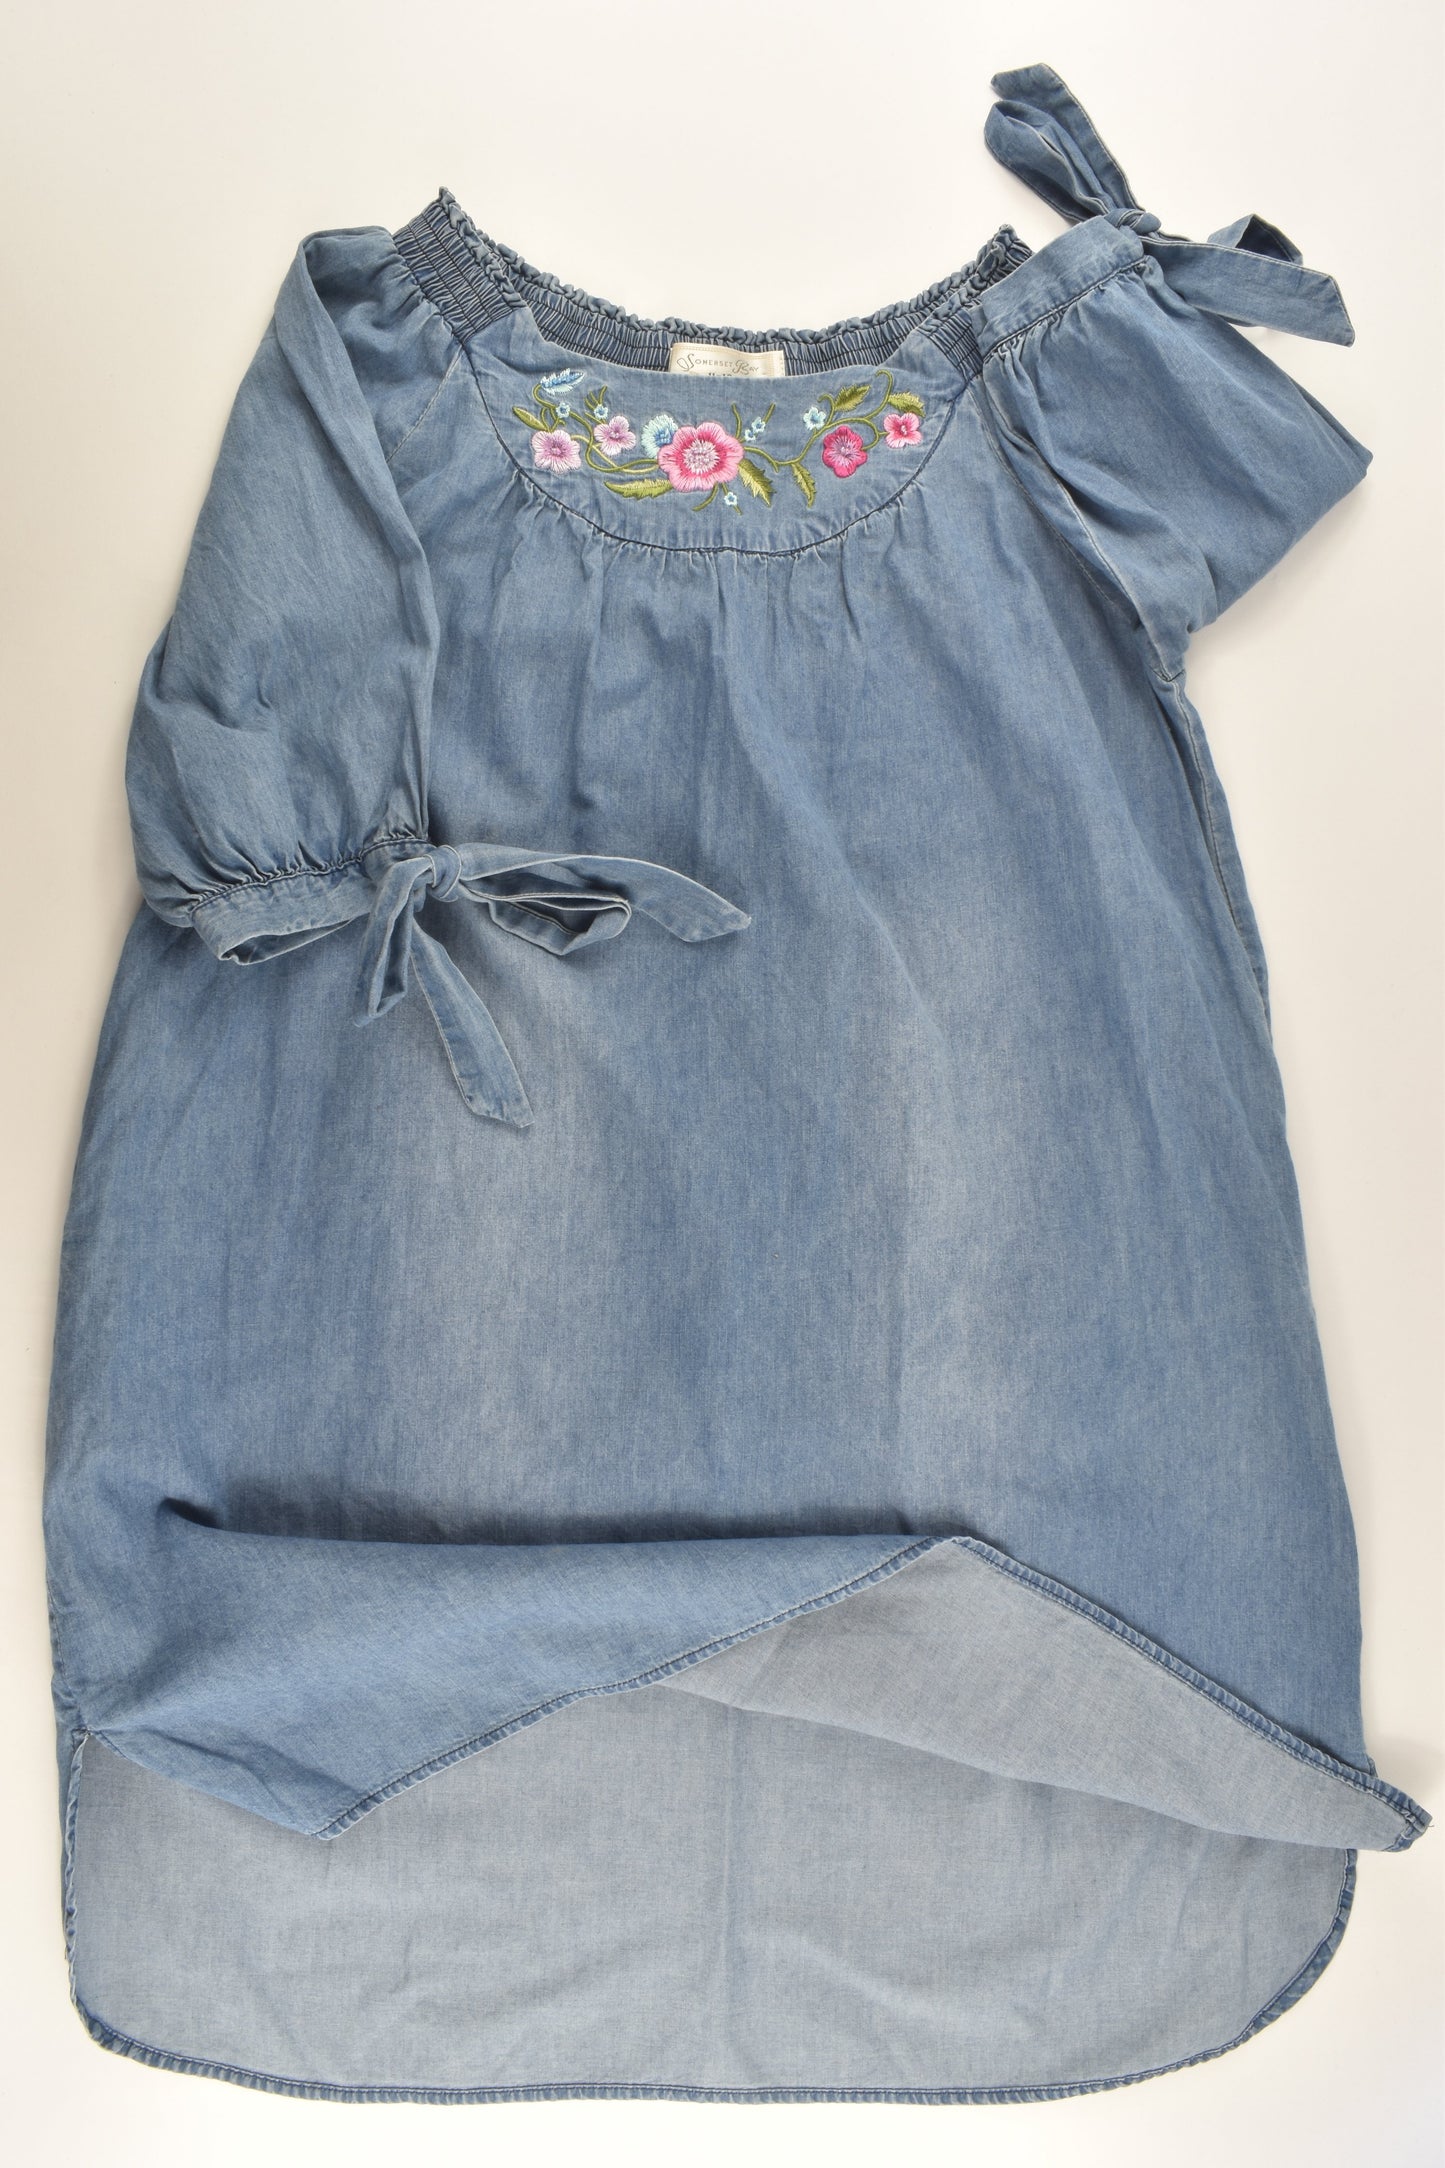 Somerset Bay Size 11-12 Lightweight Denim Dress with Floral Embroidery